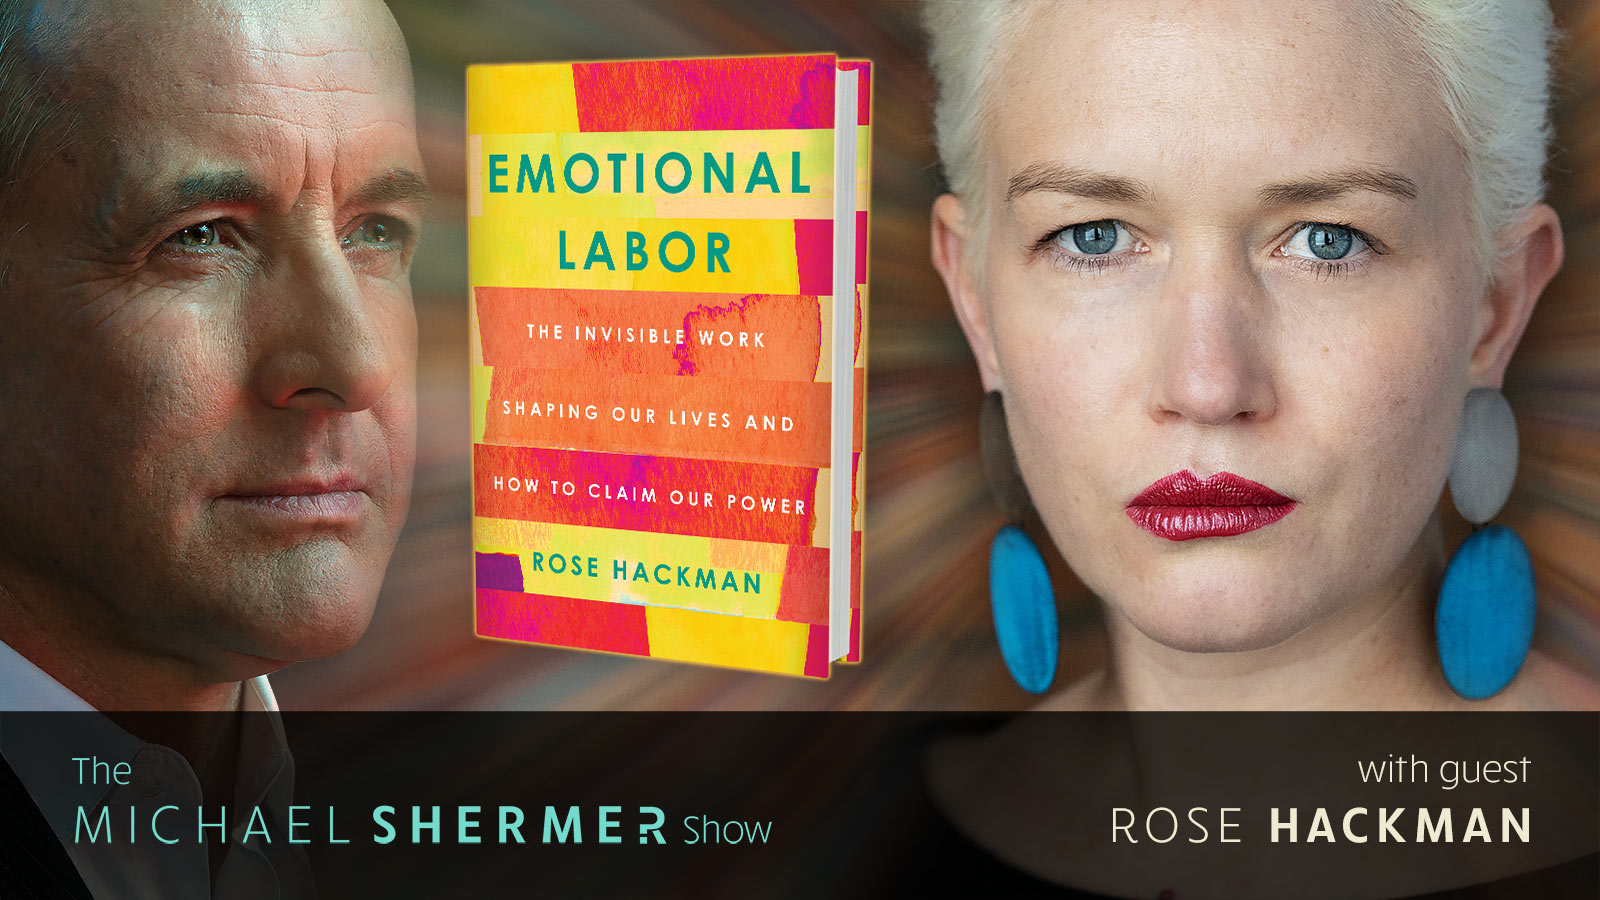 Tichar And Student Sex Vidyo Mp3 - Skeptic Â» The Michael Shermer Show Â» Rose Hackman â€” Emotional Labor: The  Invisible Work Shaping Our Lives